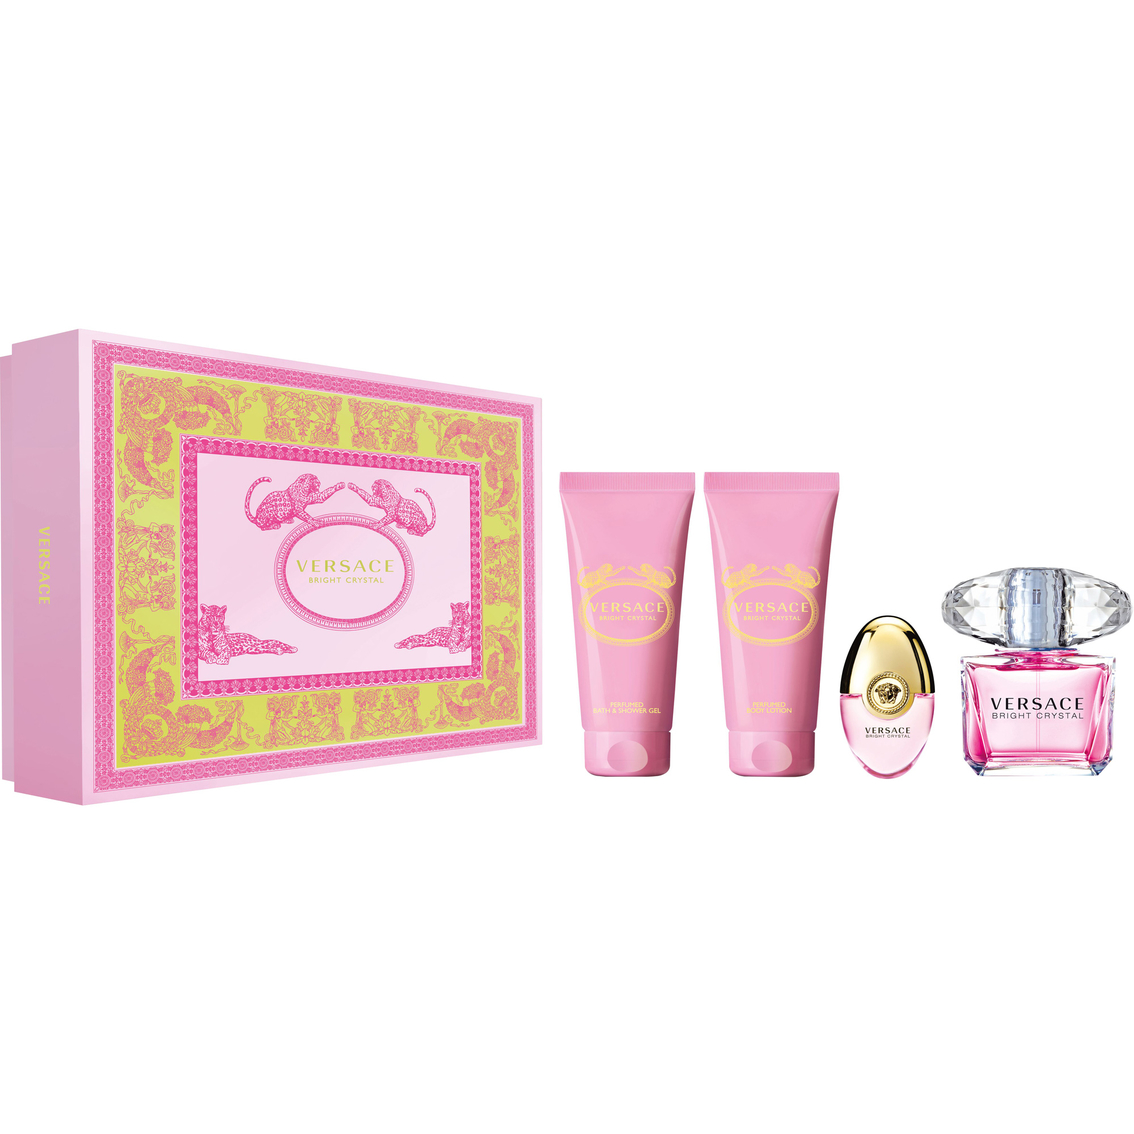 Versace Bright Crystal Holiday Gift Set | Women's Fragrances | Beauty ...